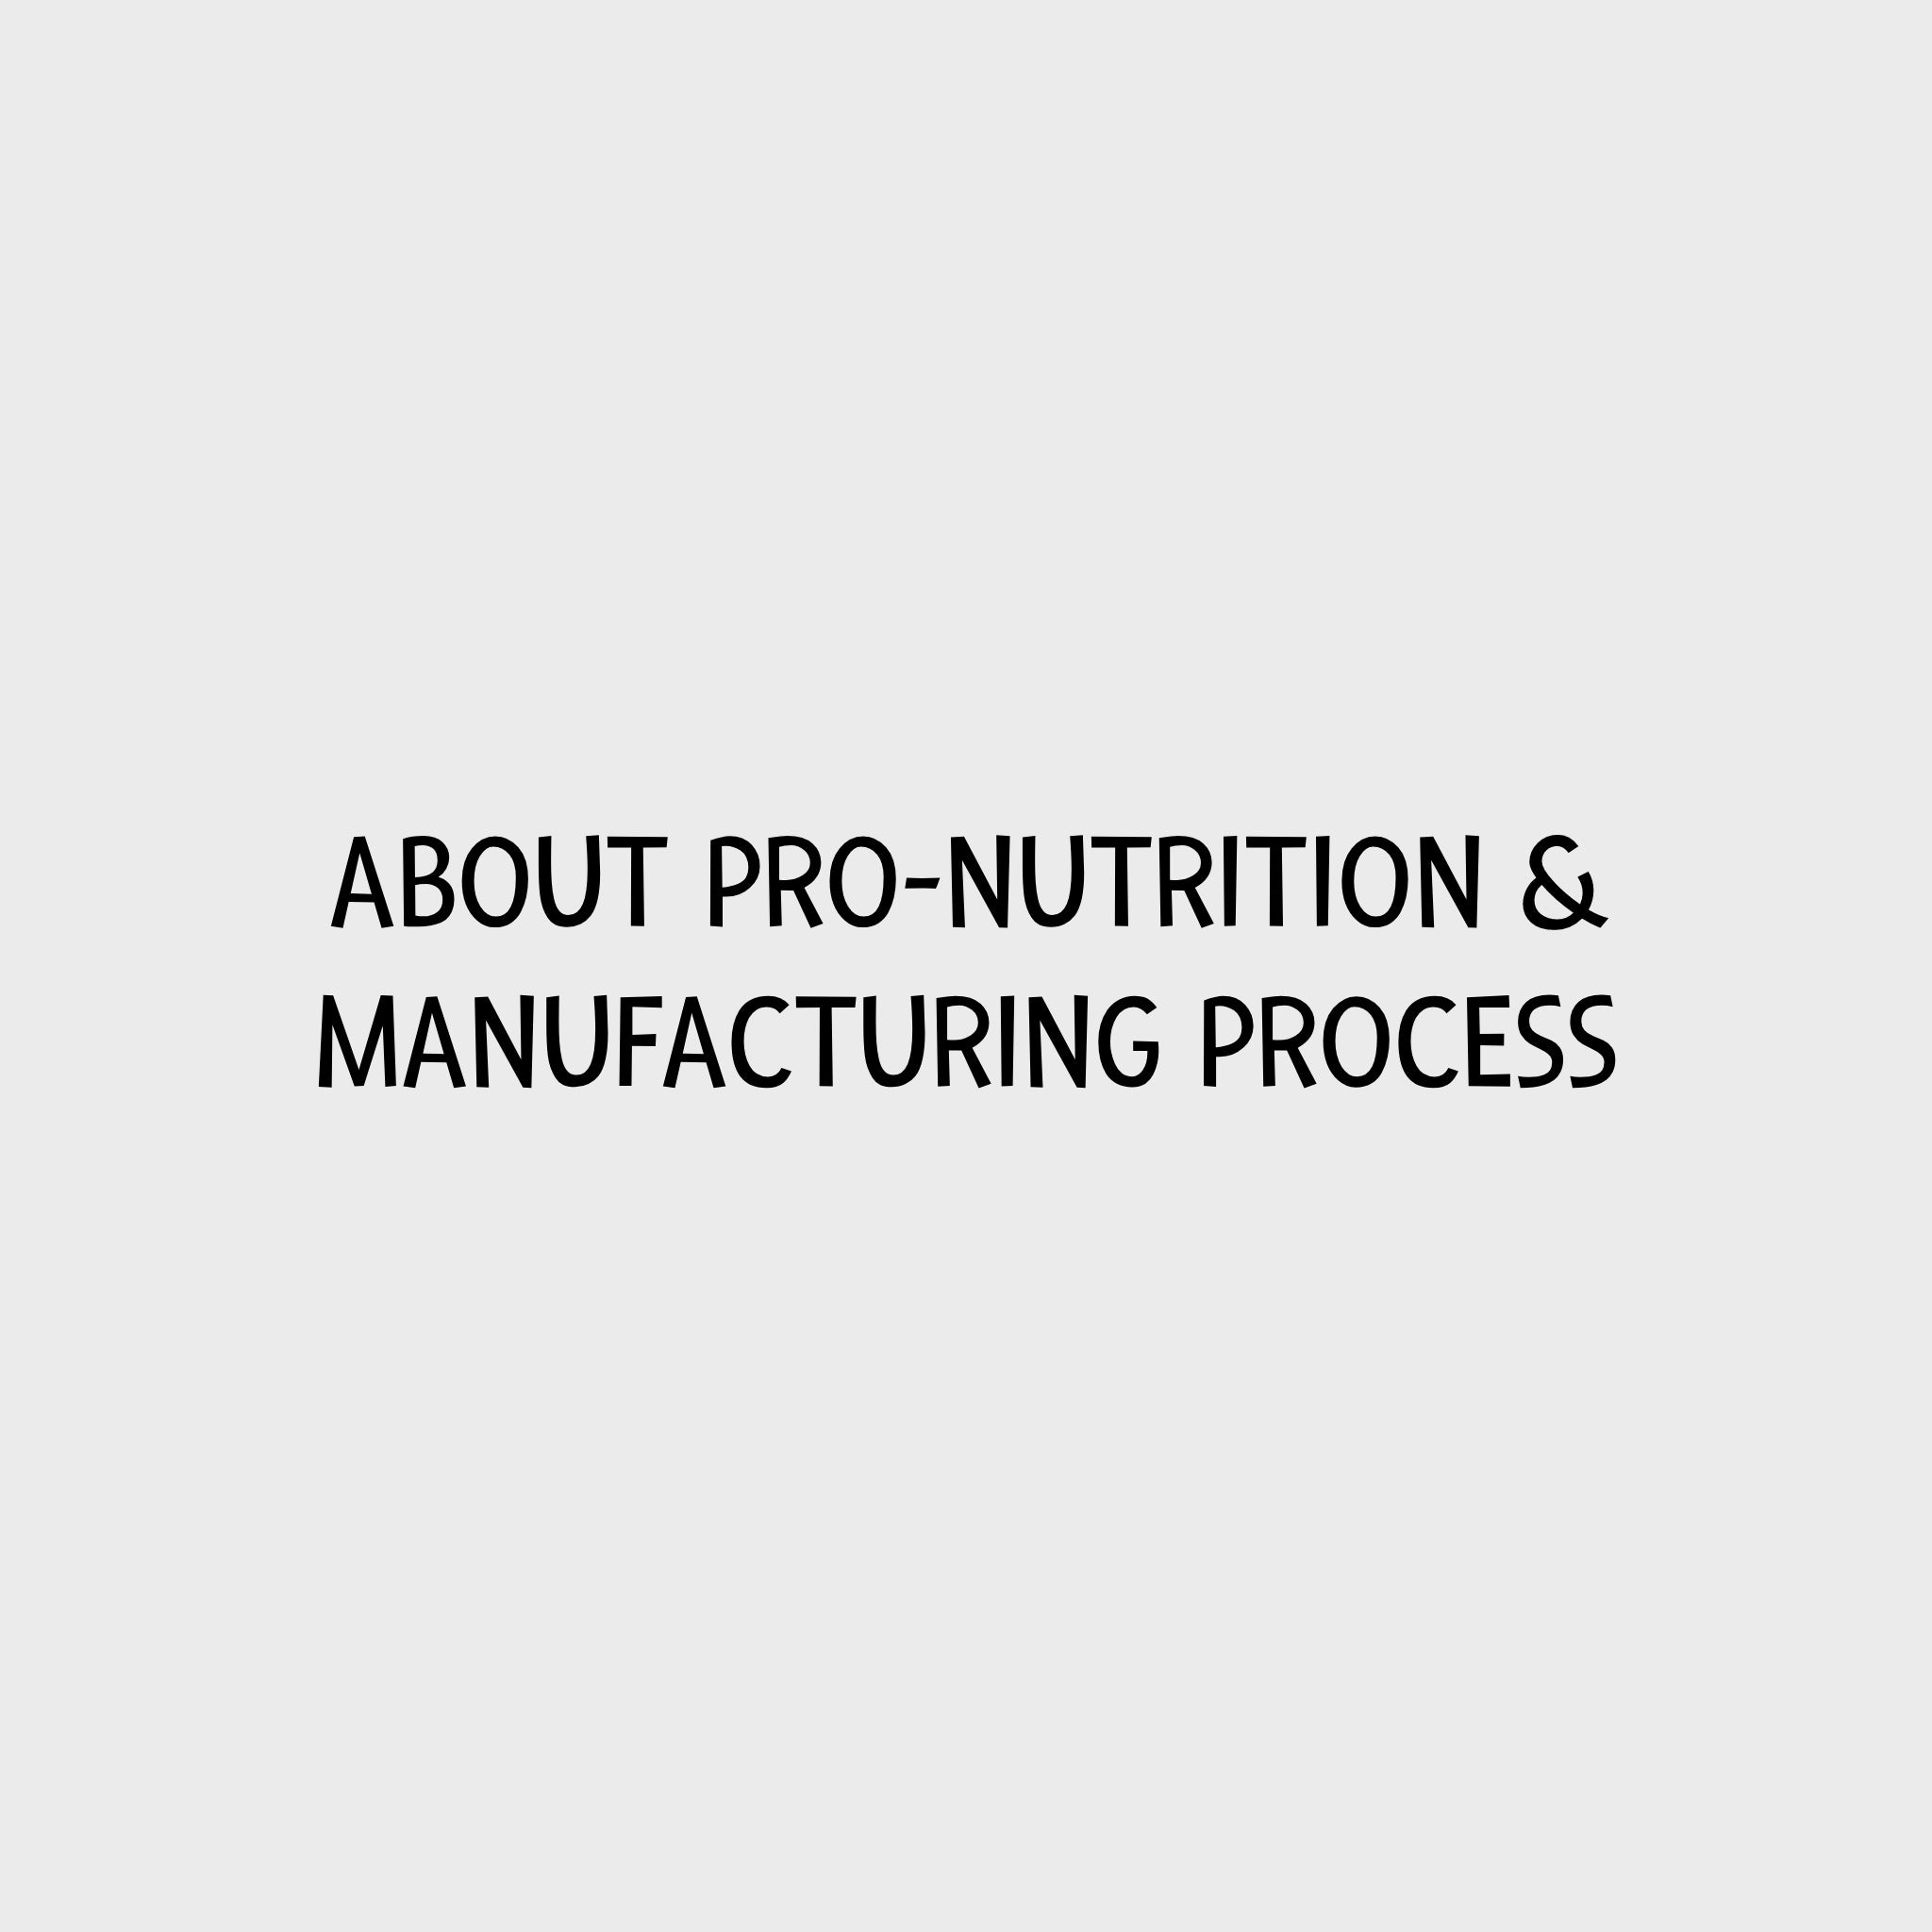 Video - About Pro-Nutrition - Manufacture process